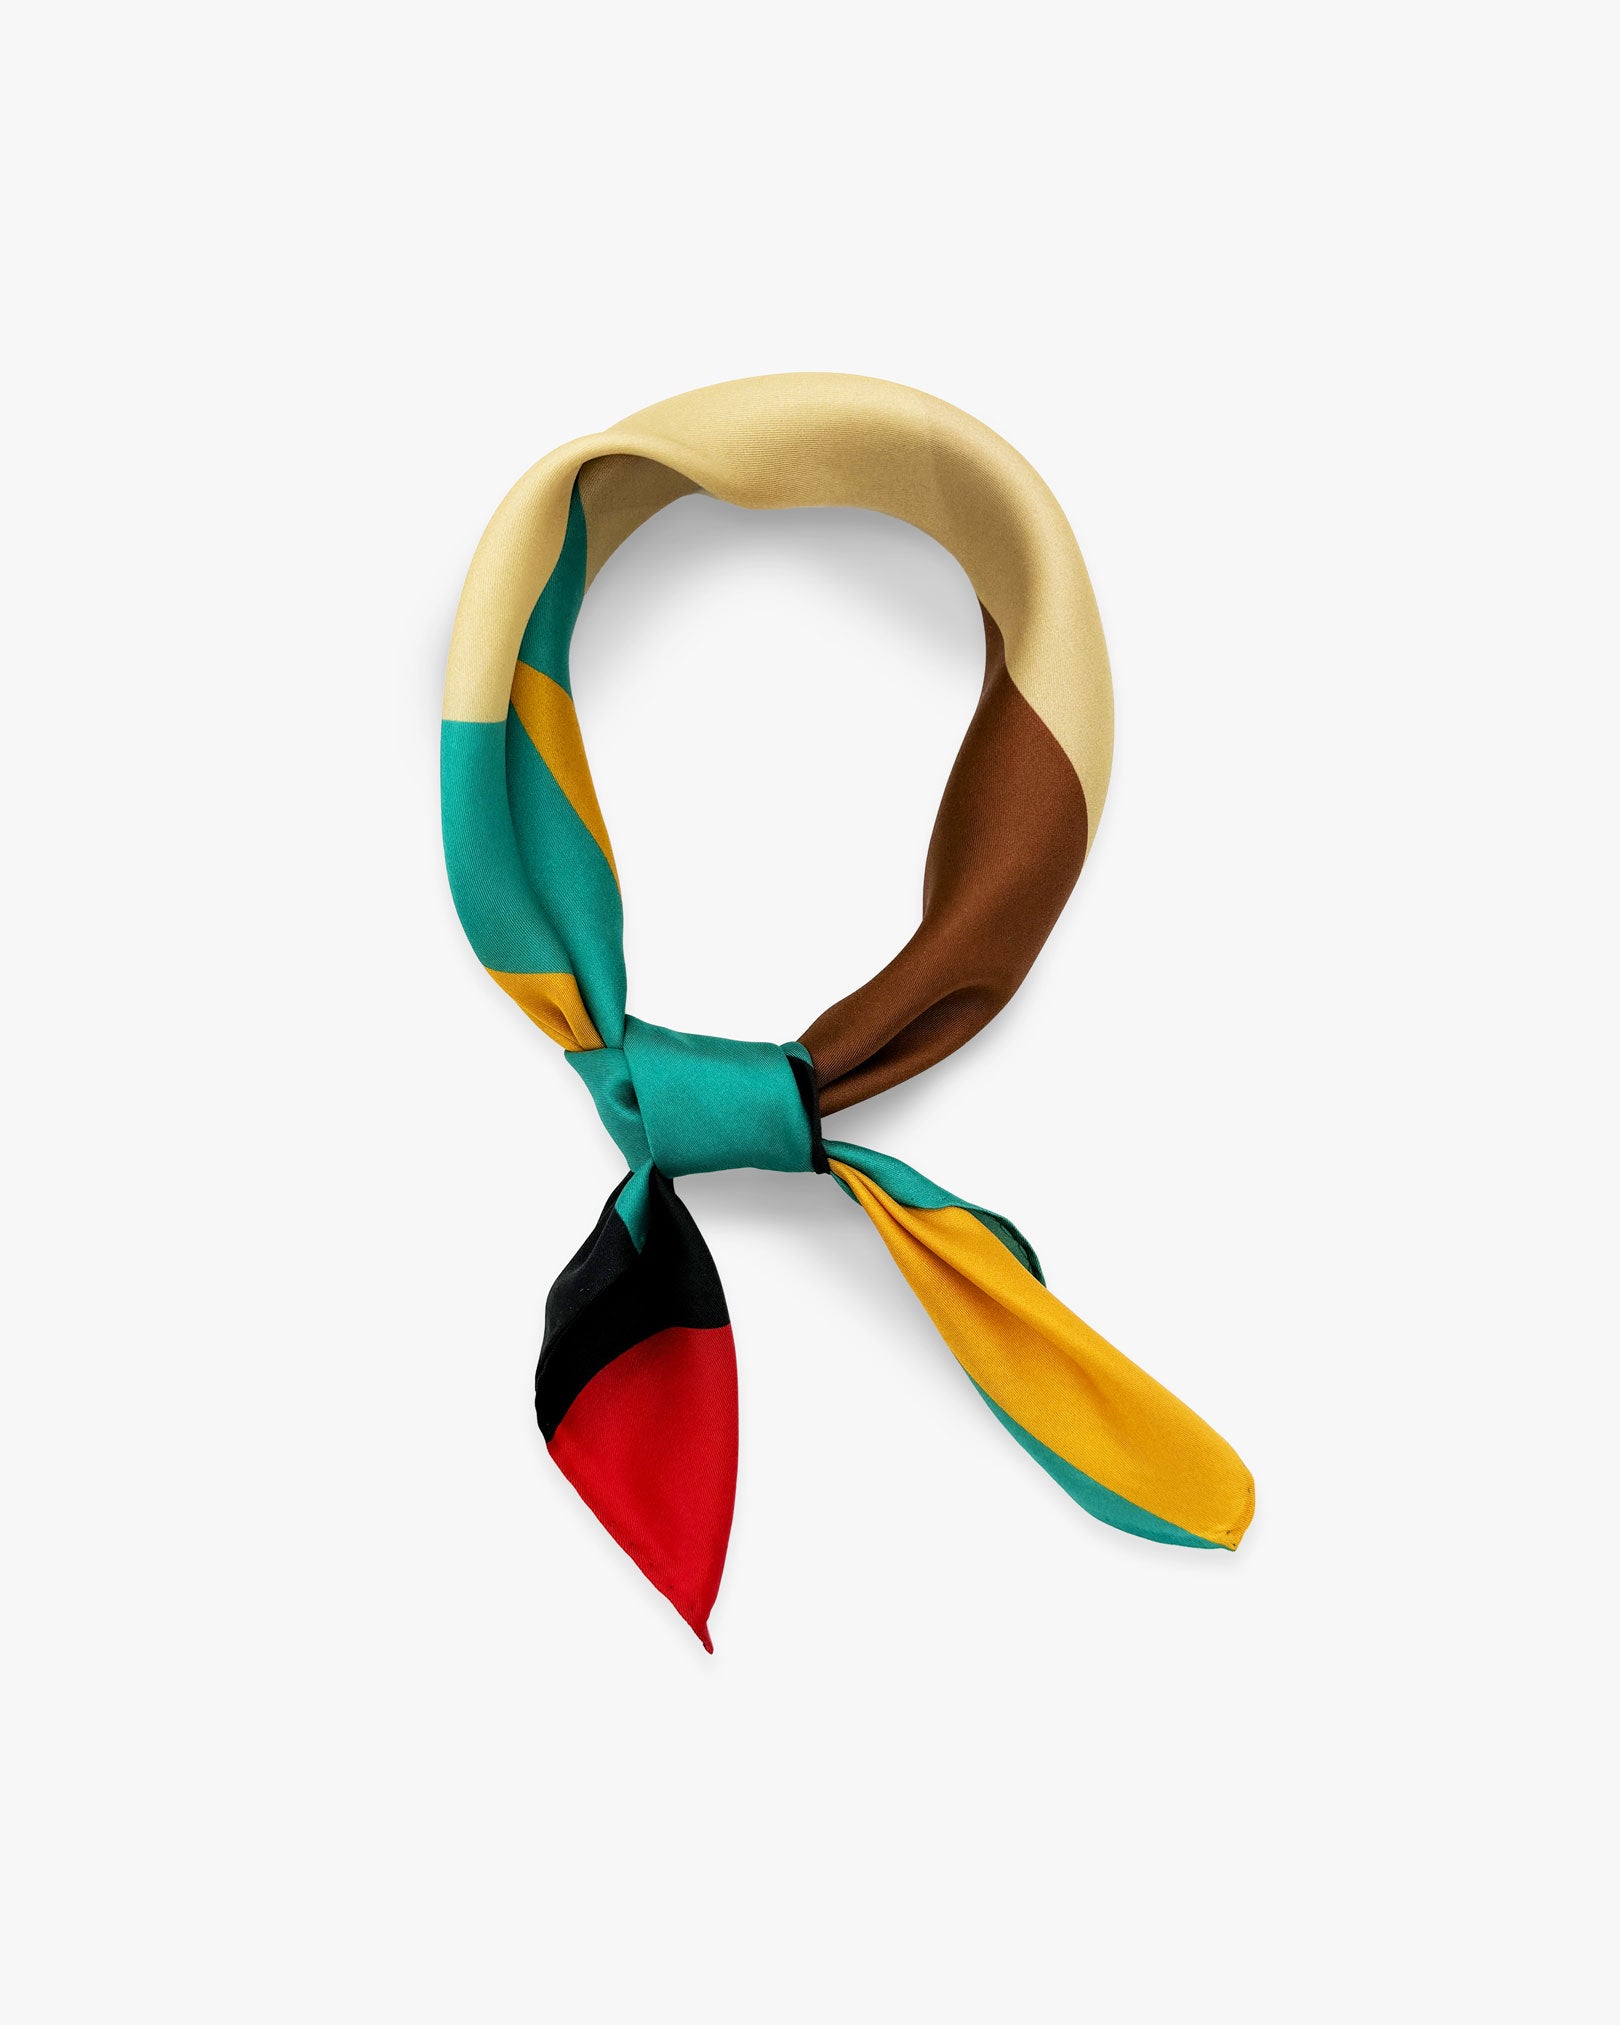 The 'Berlin' Bauhaus-inspired silk neckerchief knotted and looped against a white background.